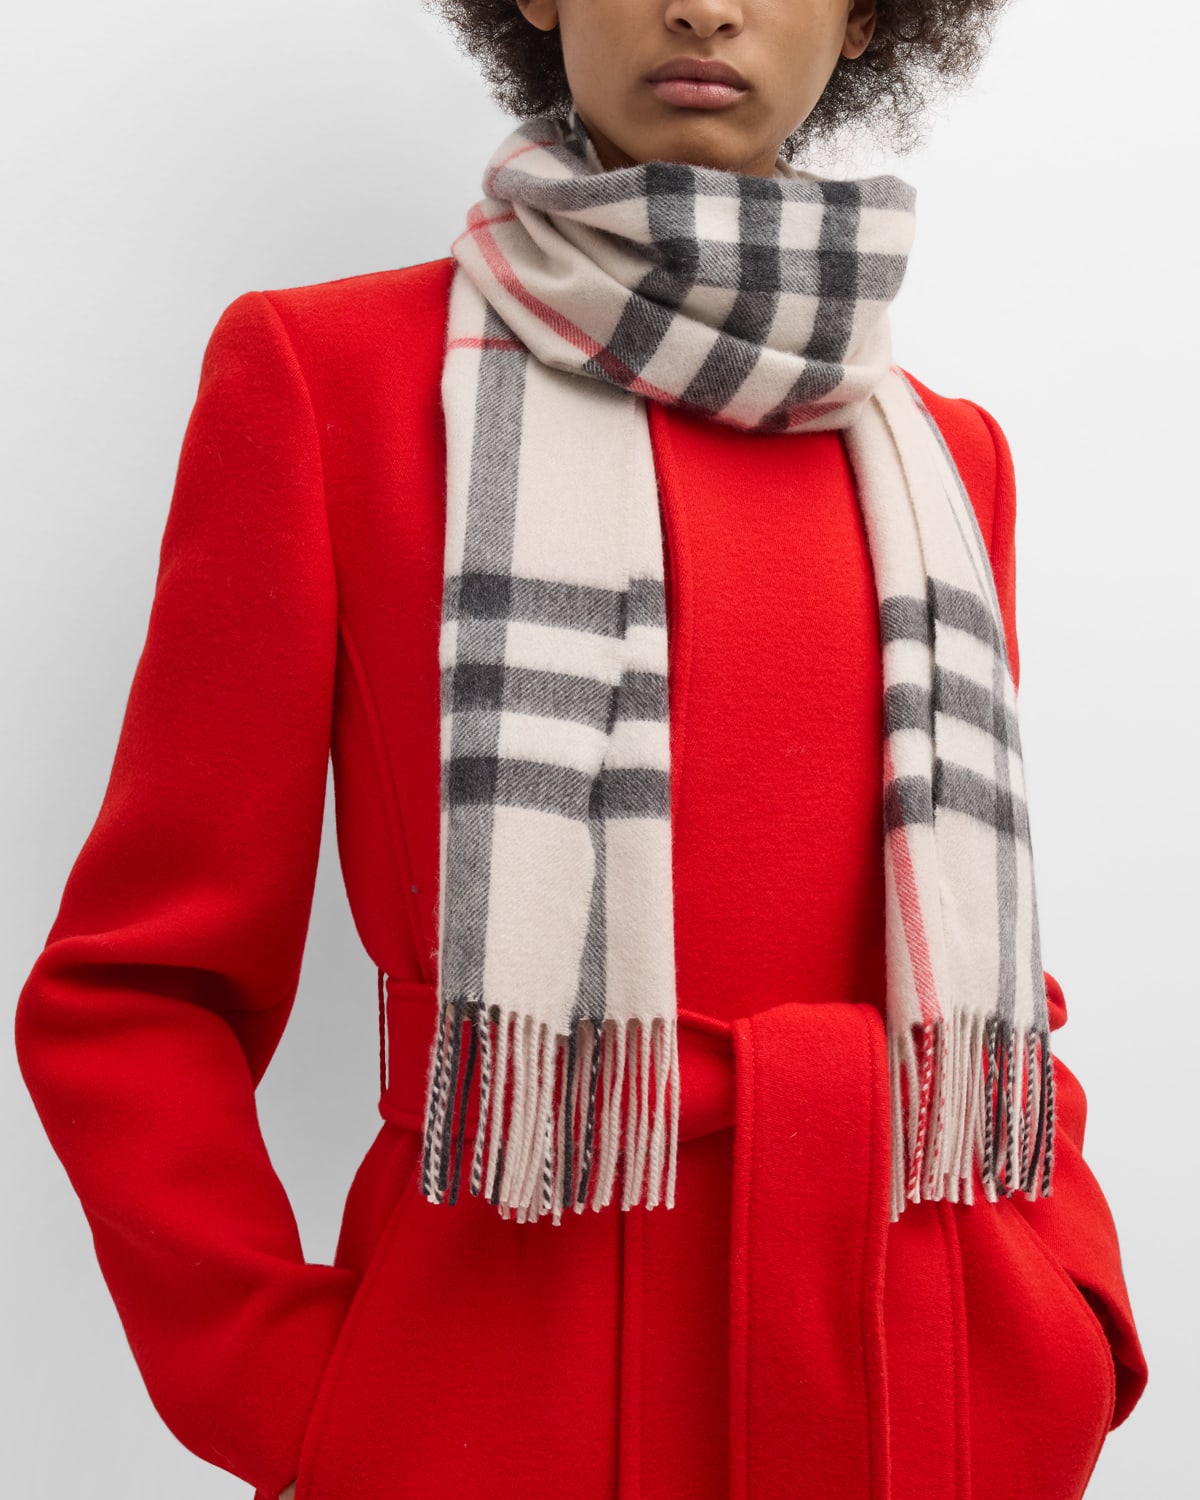 Burberry Giant-Check Cashmere Scarf